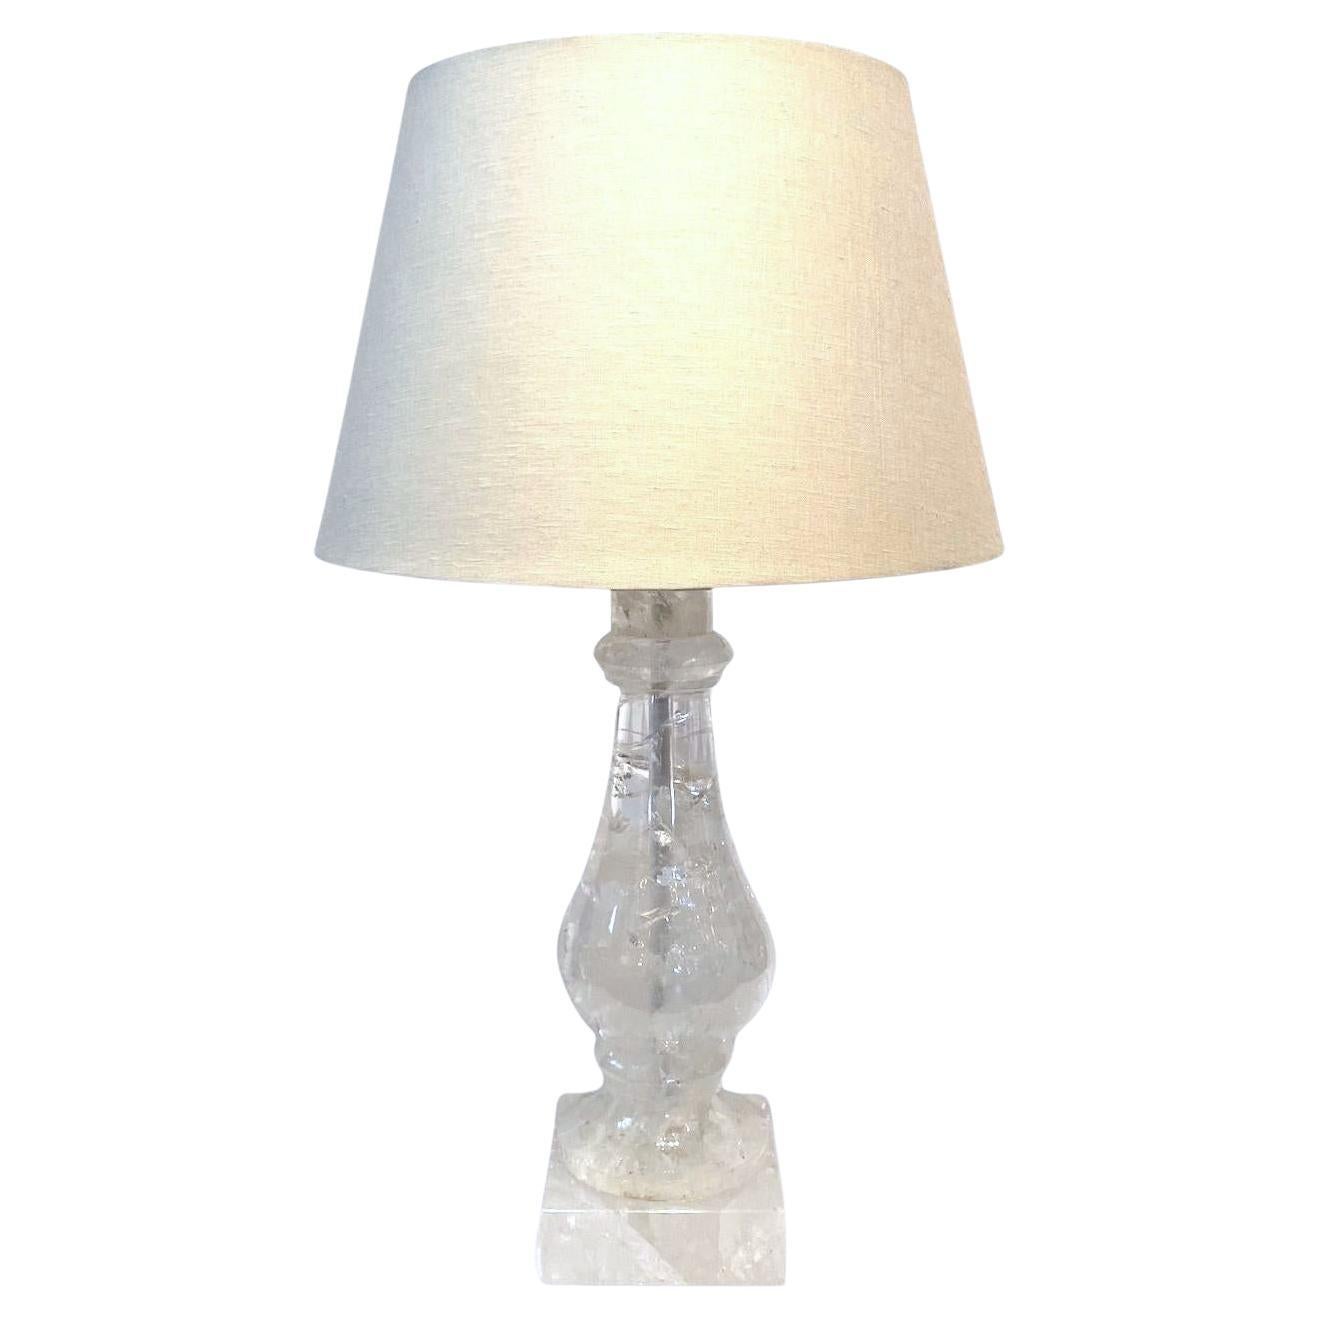 Rock crystal from Madagascar made into a lamp. Metal rod hides the wiring. Wired for USA. New off-white linen 17